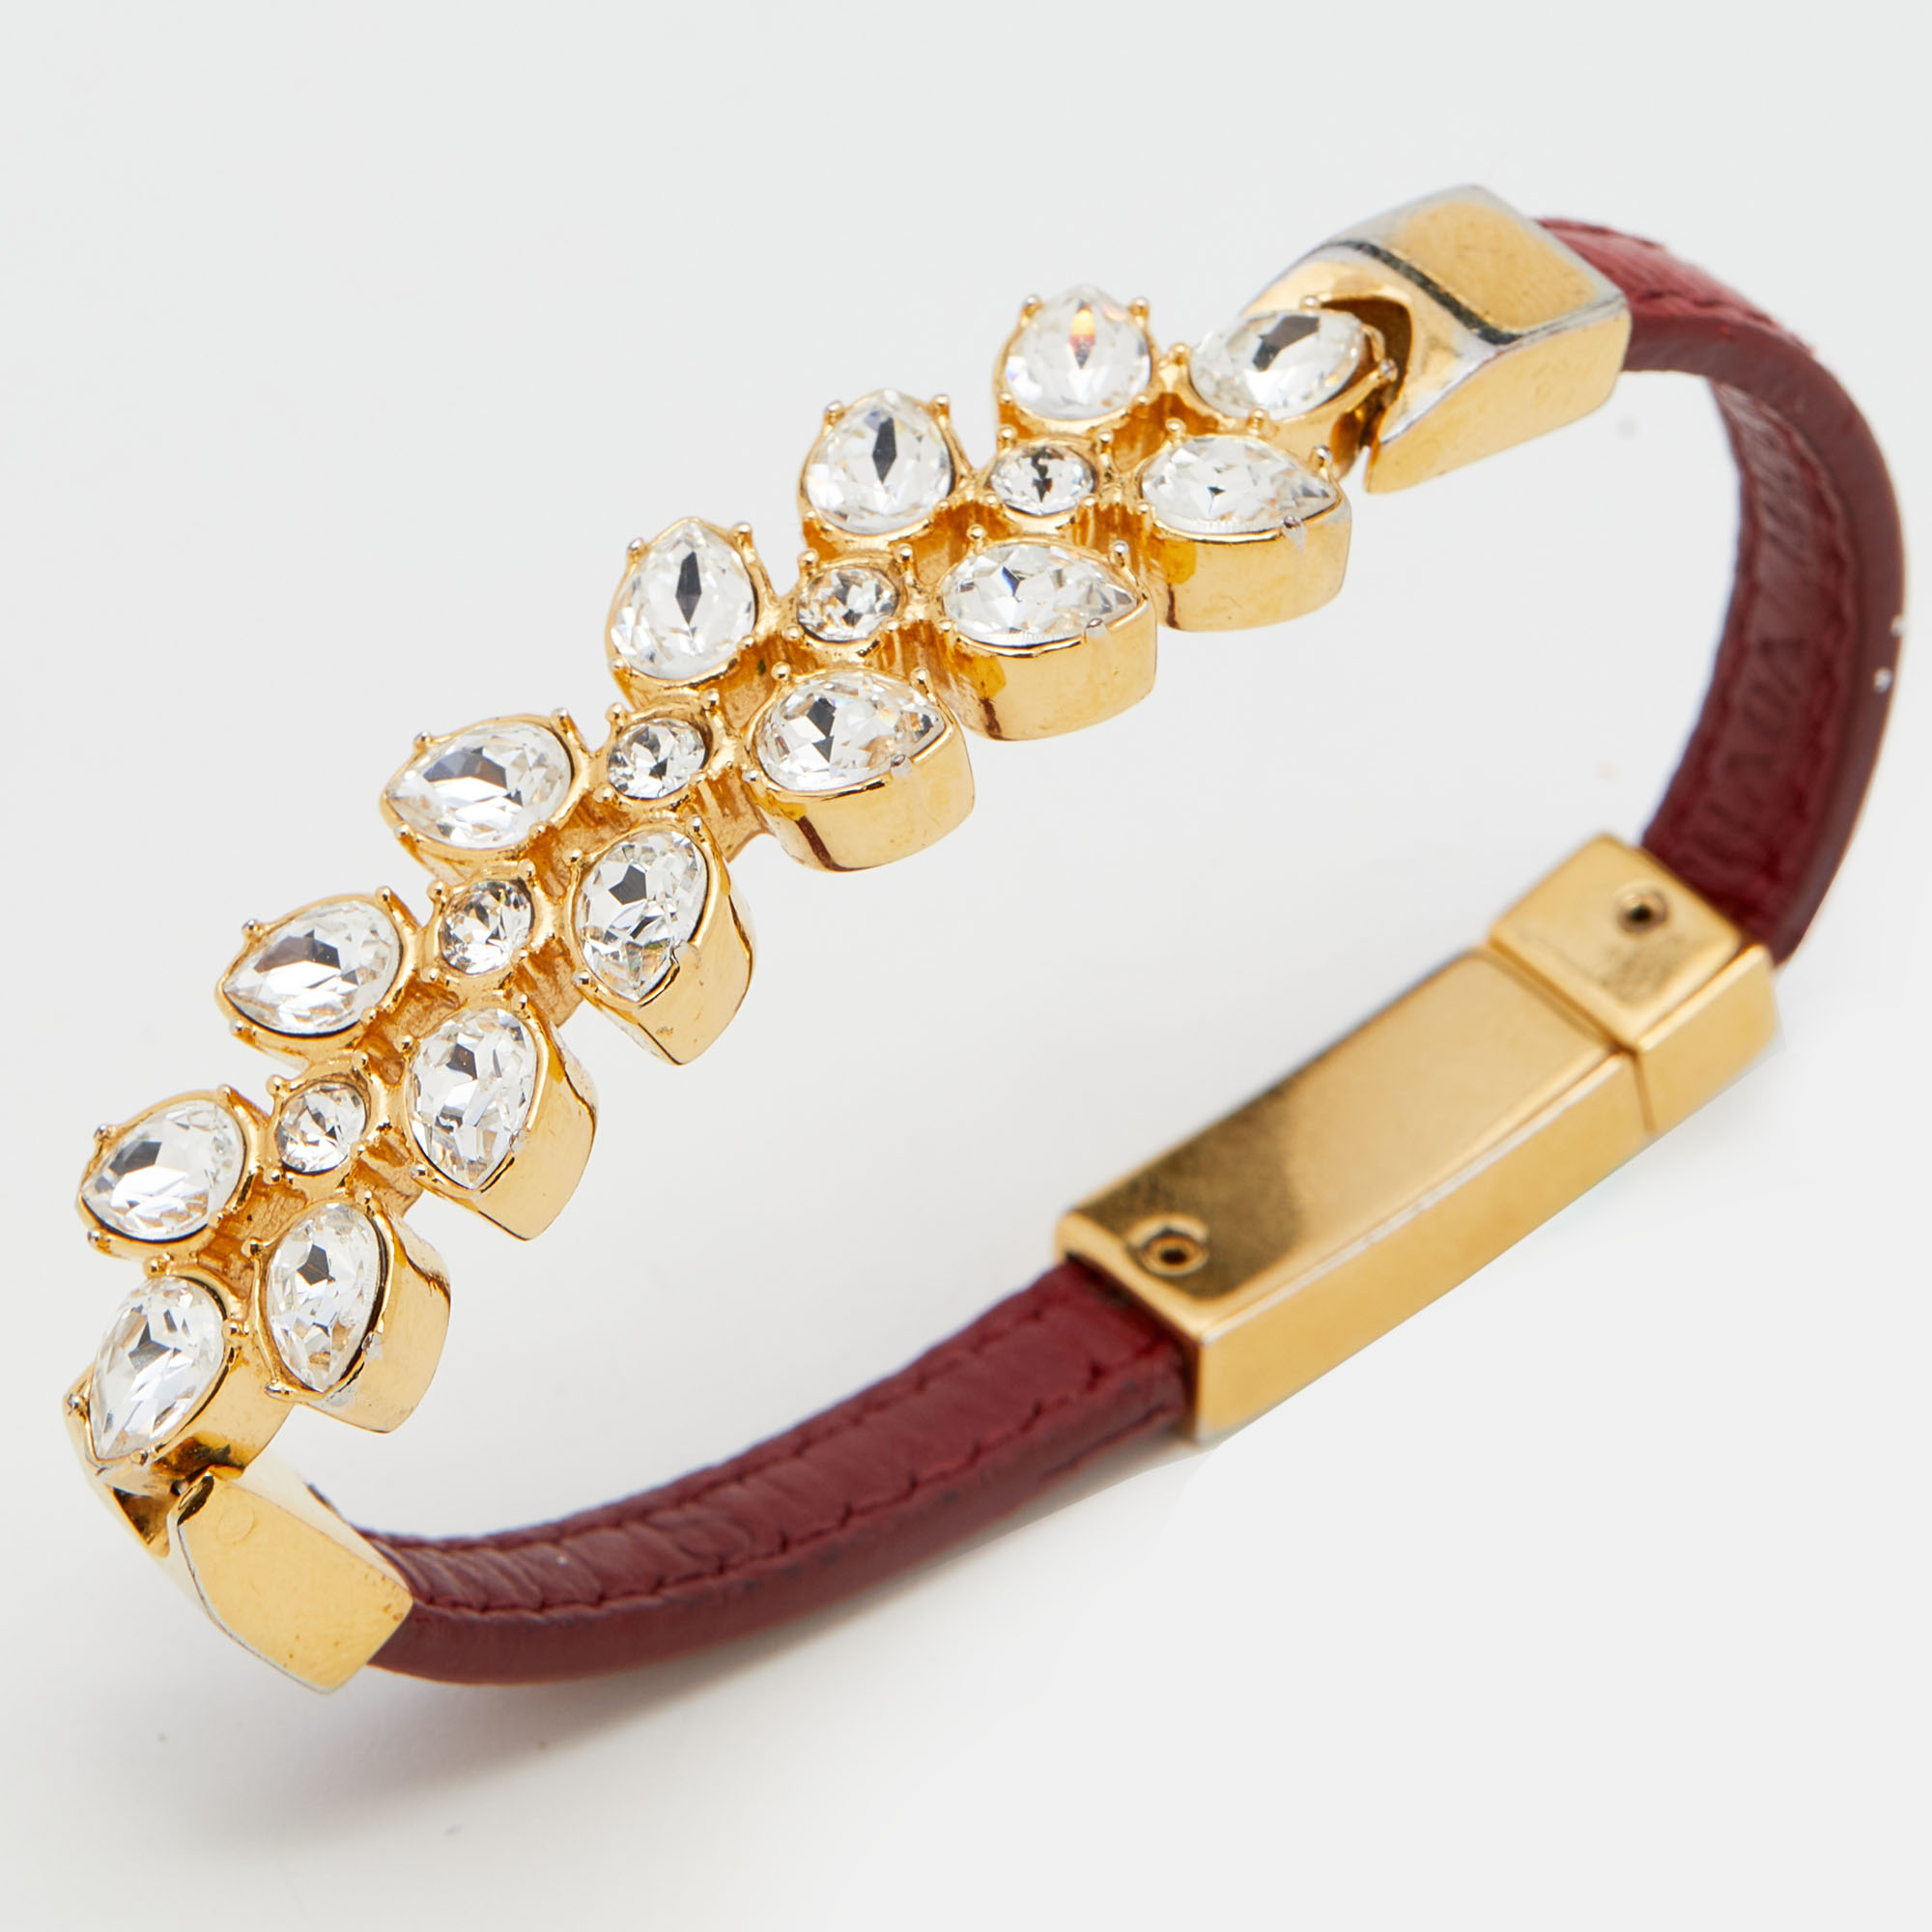 Prada Chic Crystals Red Leather Gold Tone Bracelet S